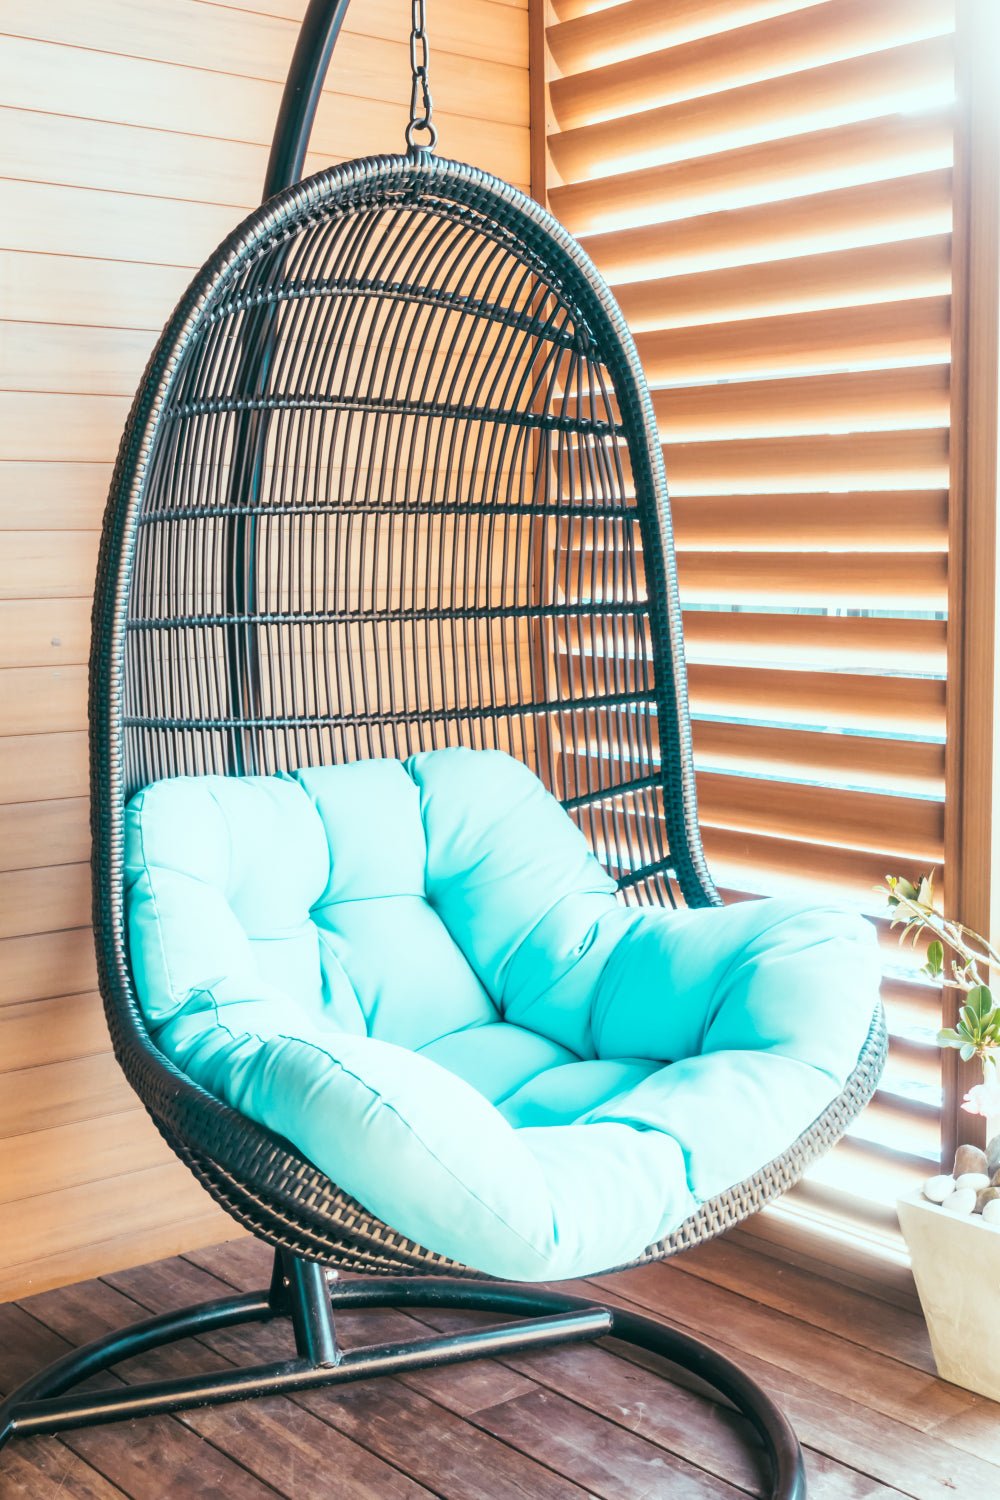 Exploring the Visual Impact and Distinctive Appeal of Hanging Egg Chairs - Oz Hammocks